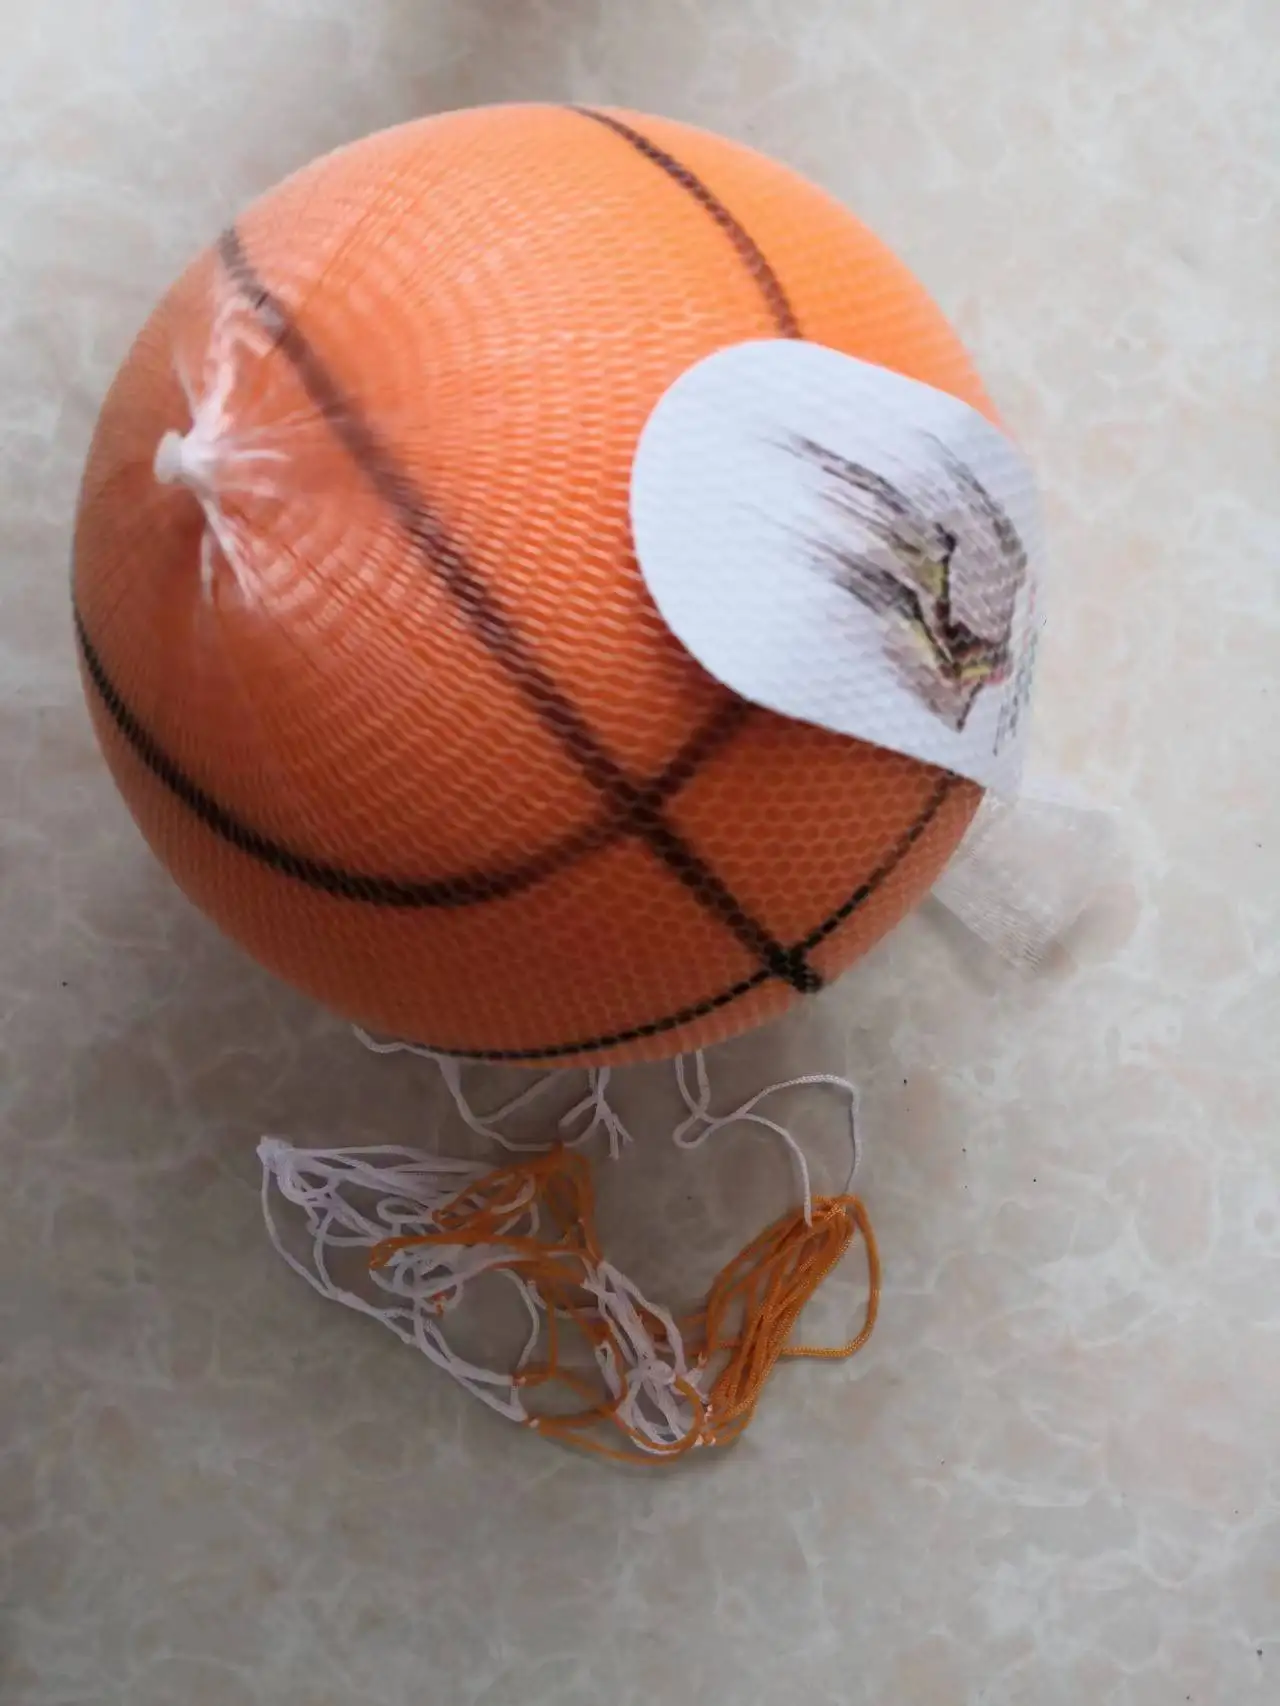 Last Day Promotion 49% OFF The Handleshh Silent Basketball